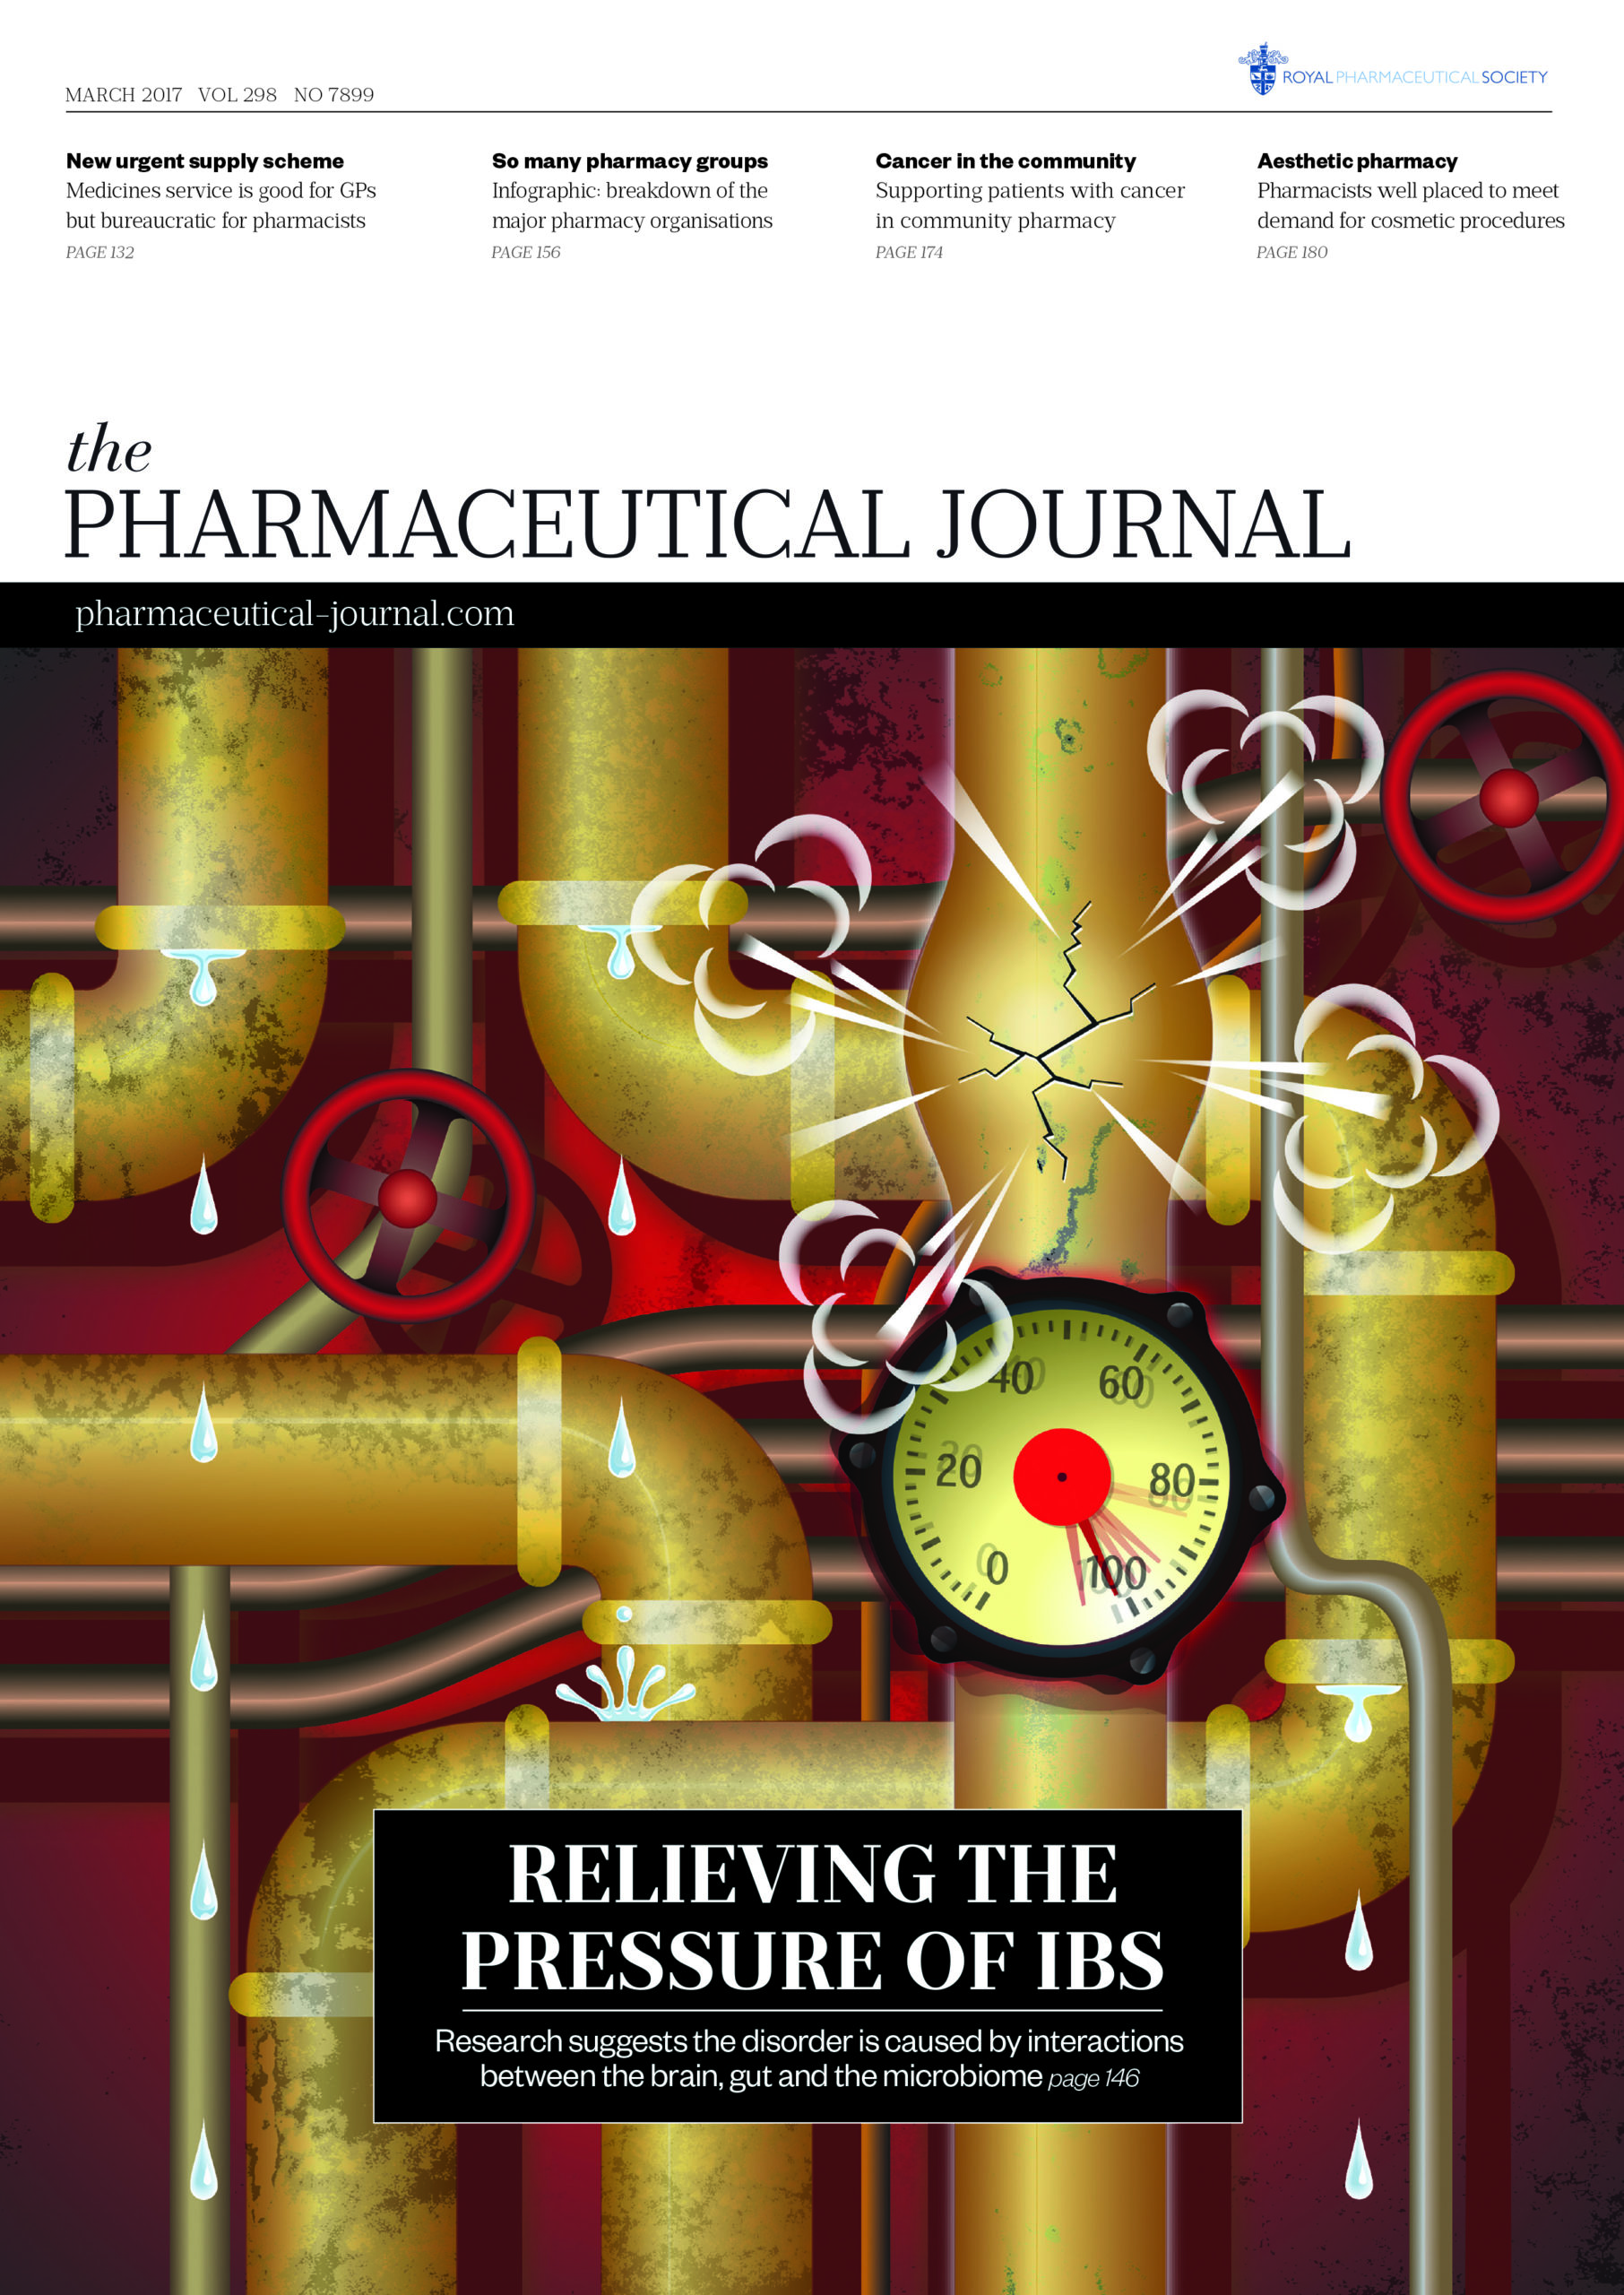 Publication issue cover for PJ, March 2017, Vol 298, No 7899